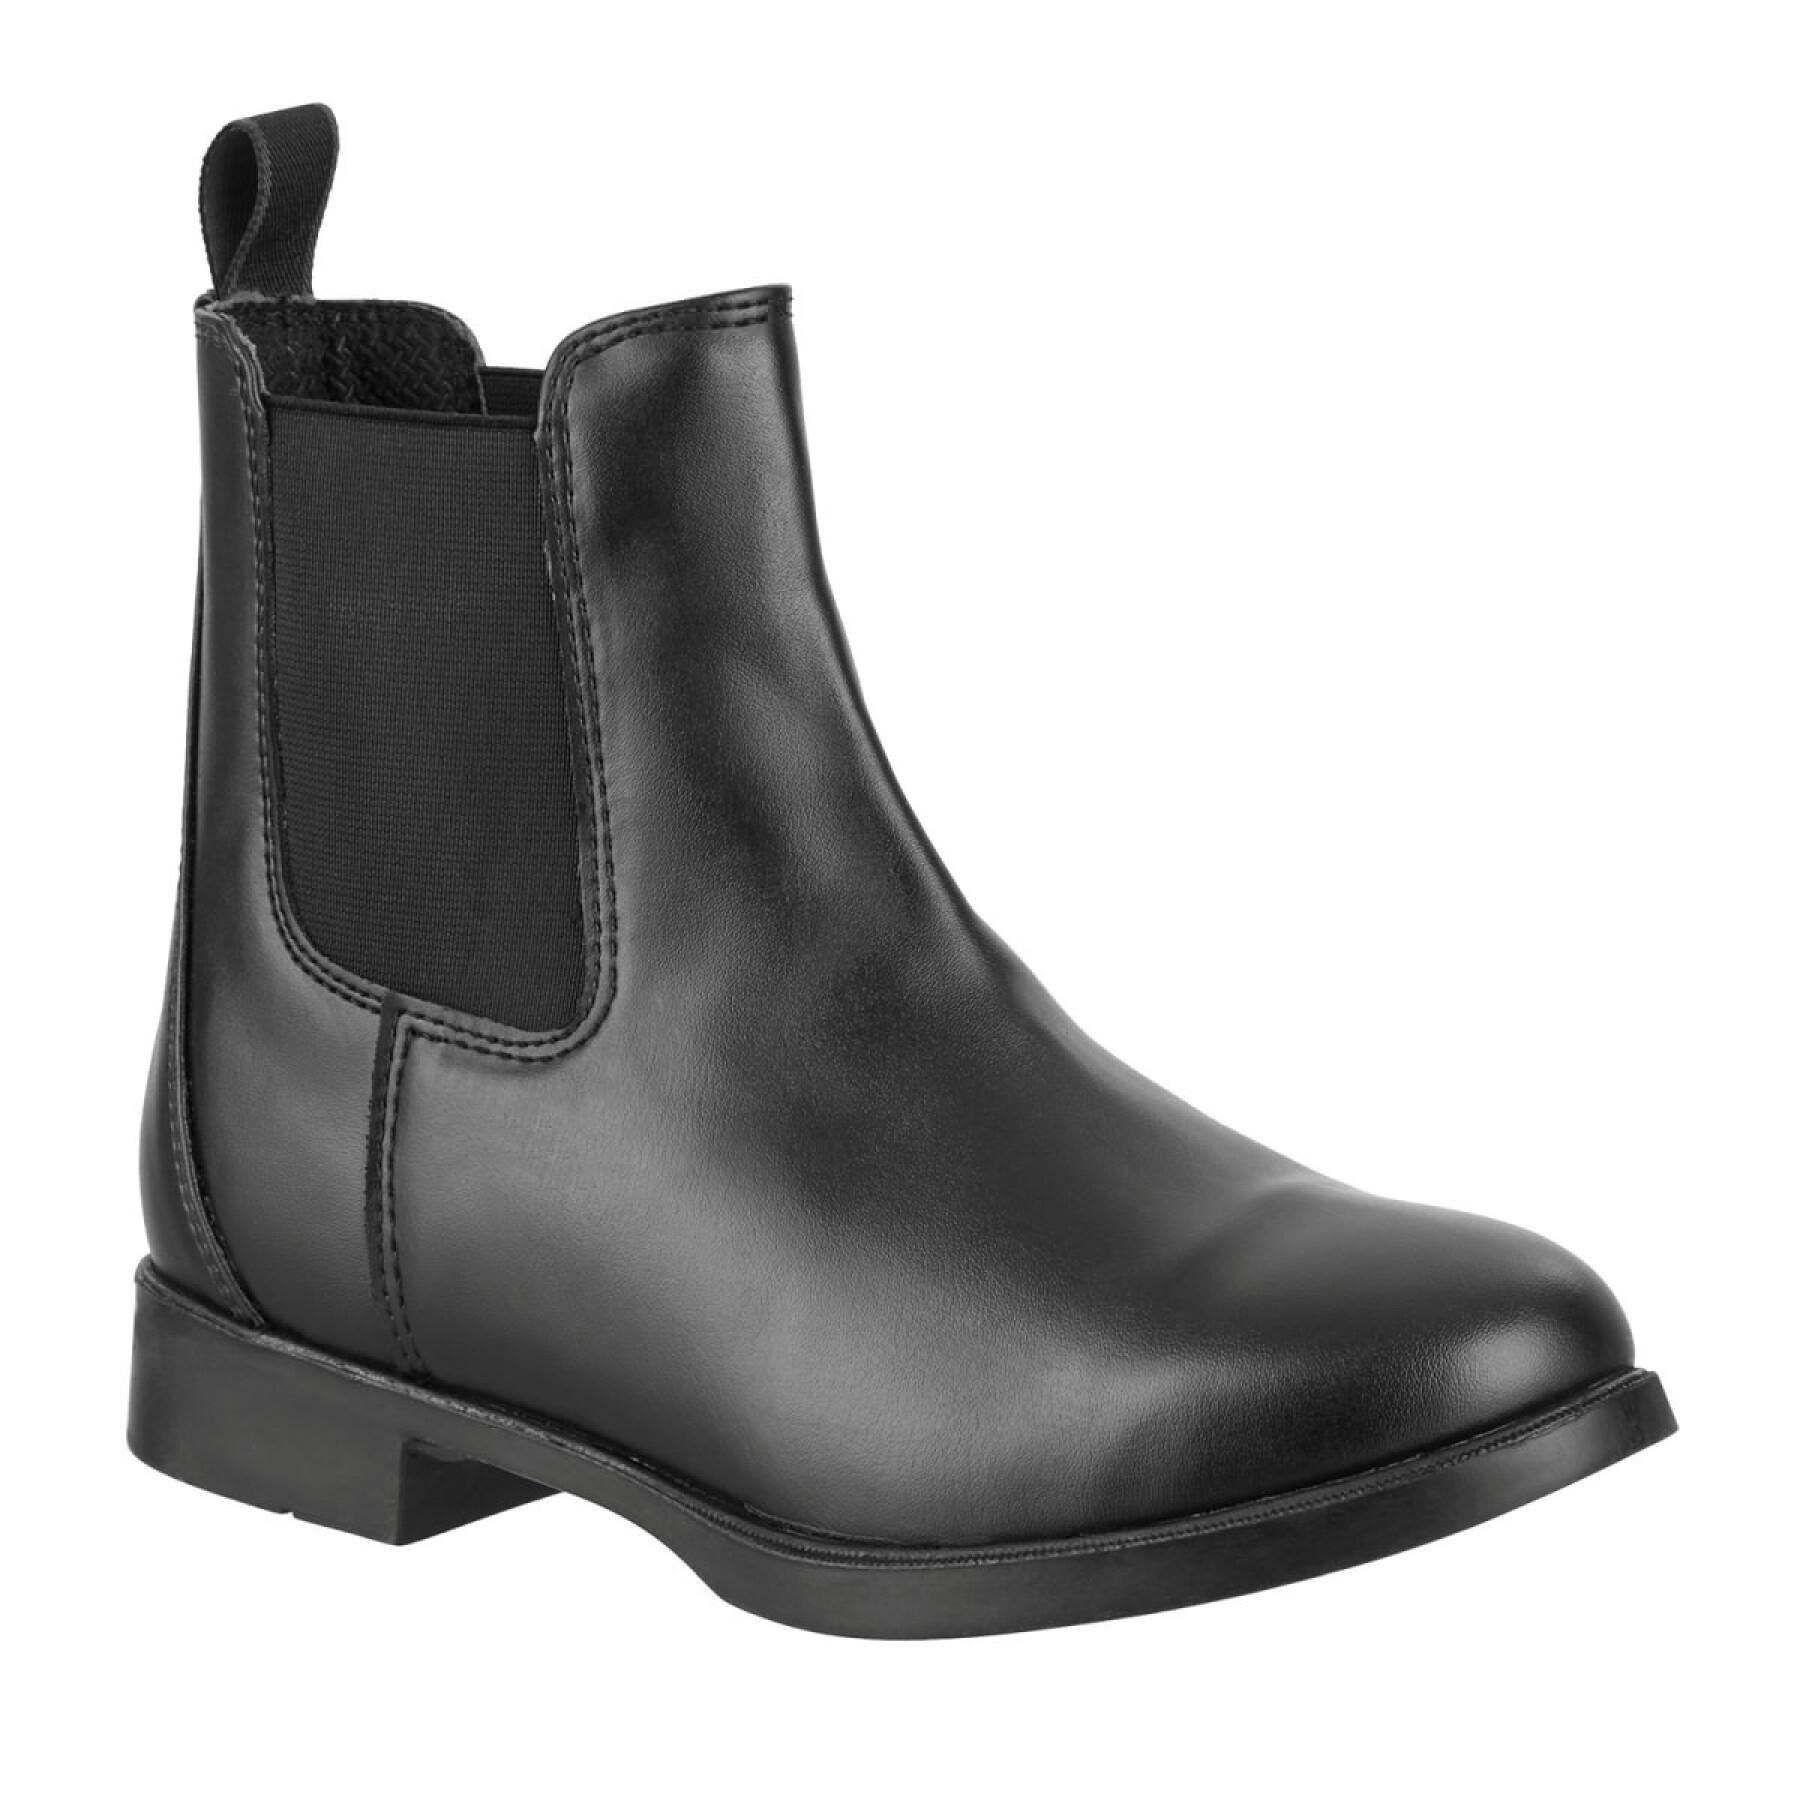 Synthetic leather riding boots Suedwind Footwear Contrace Jodhpur